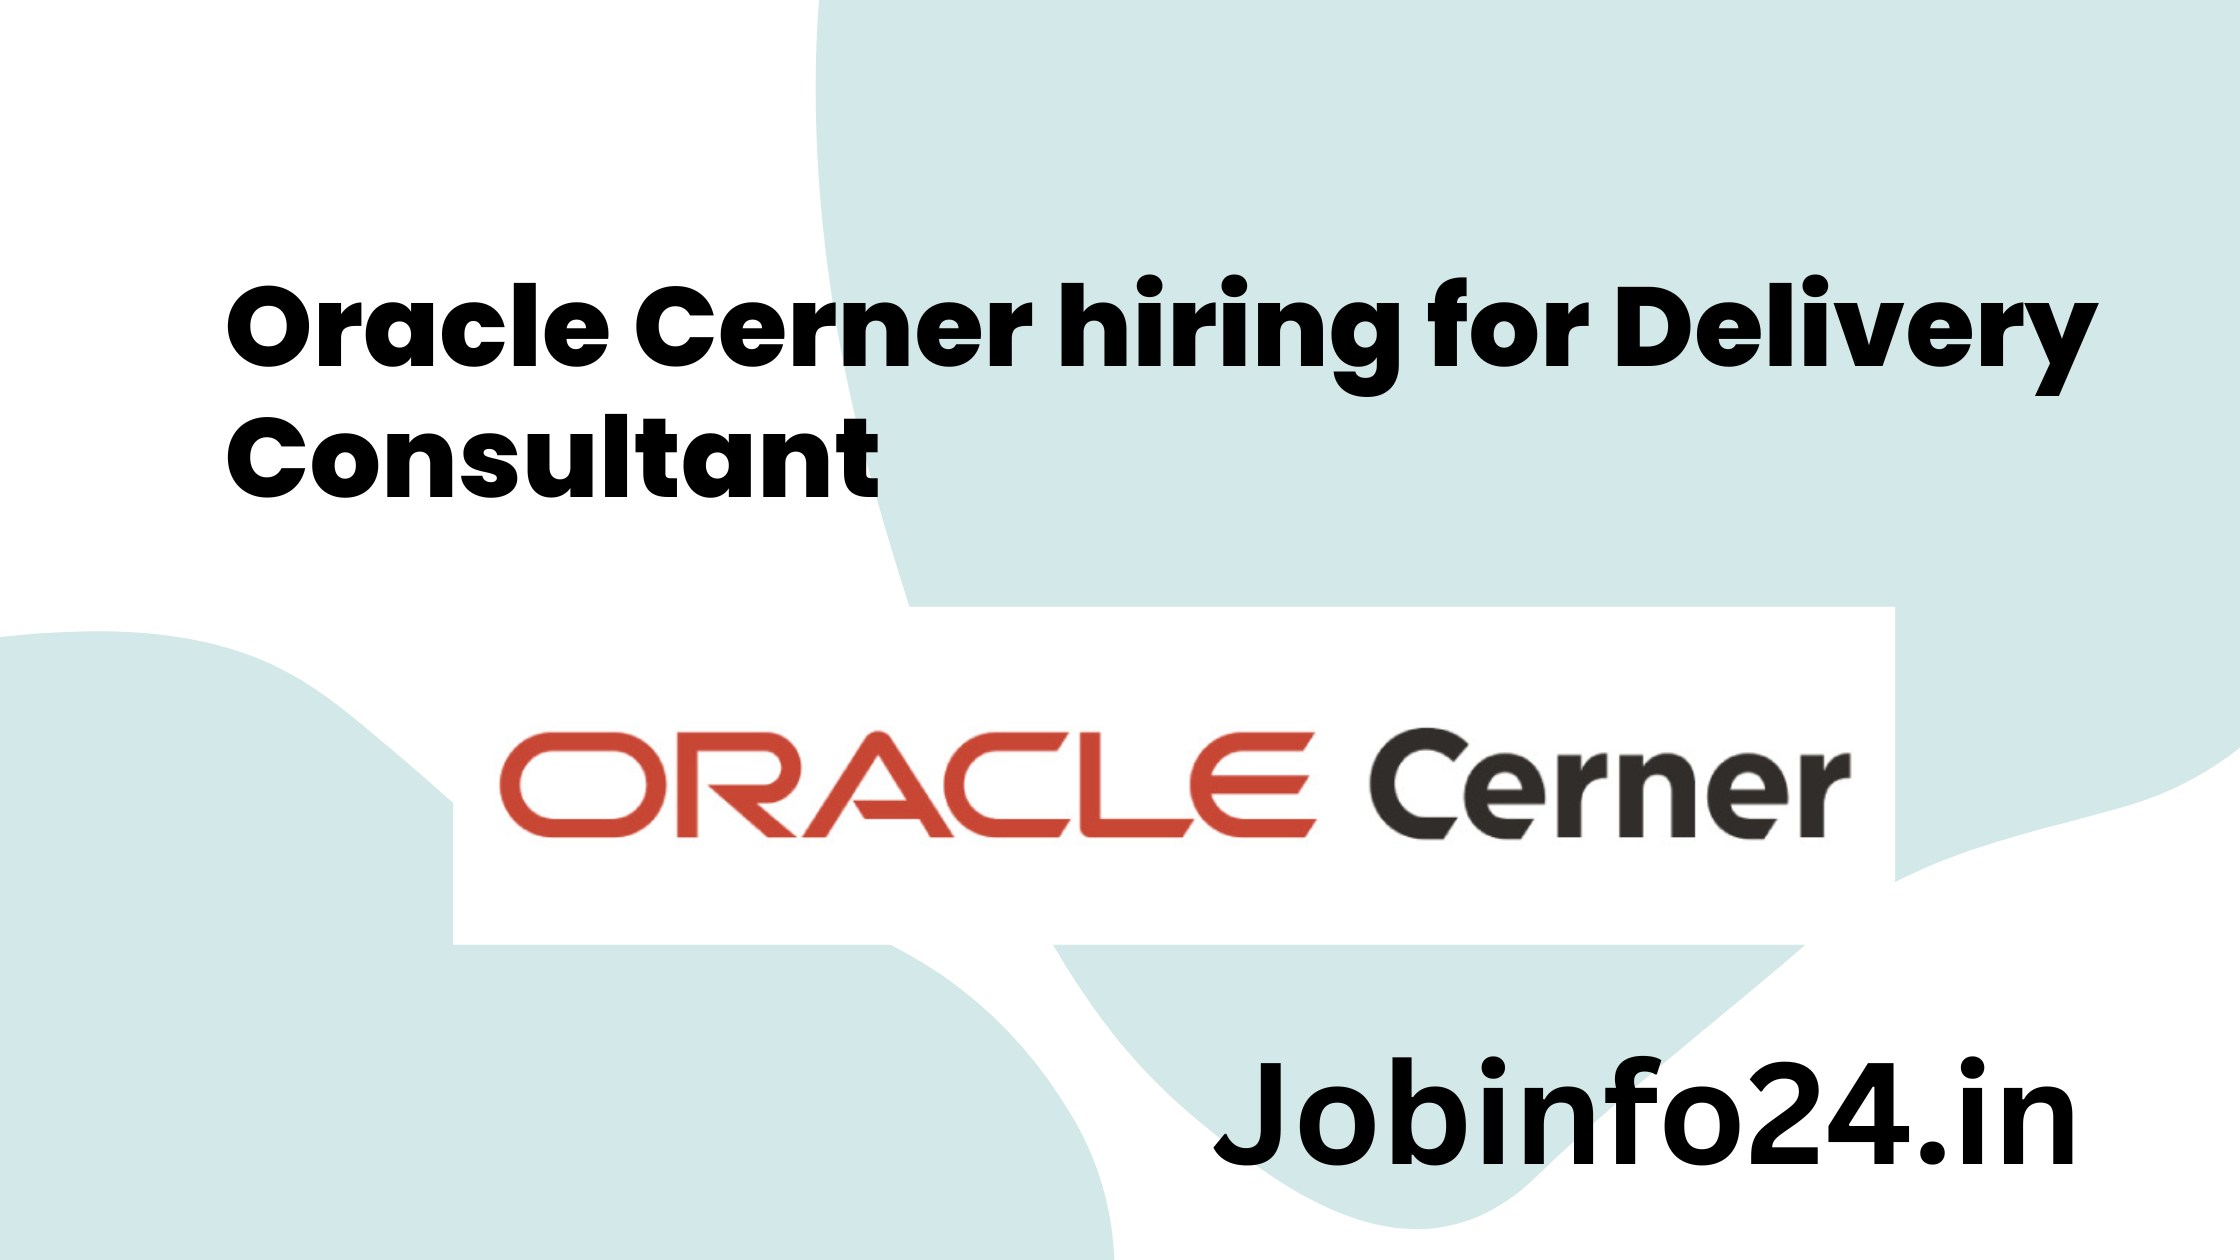 Oracle Cerner hiring for Delivery Consultant